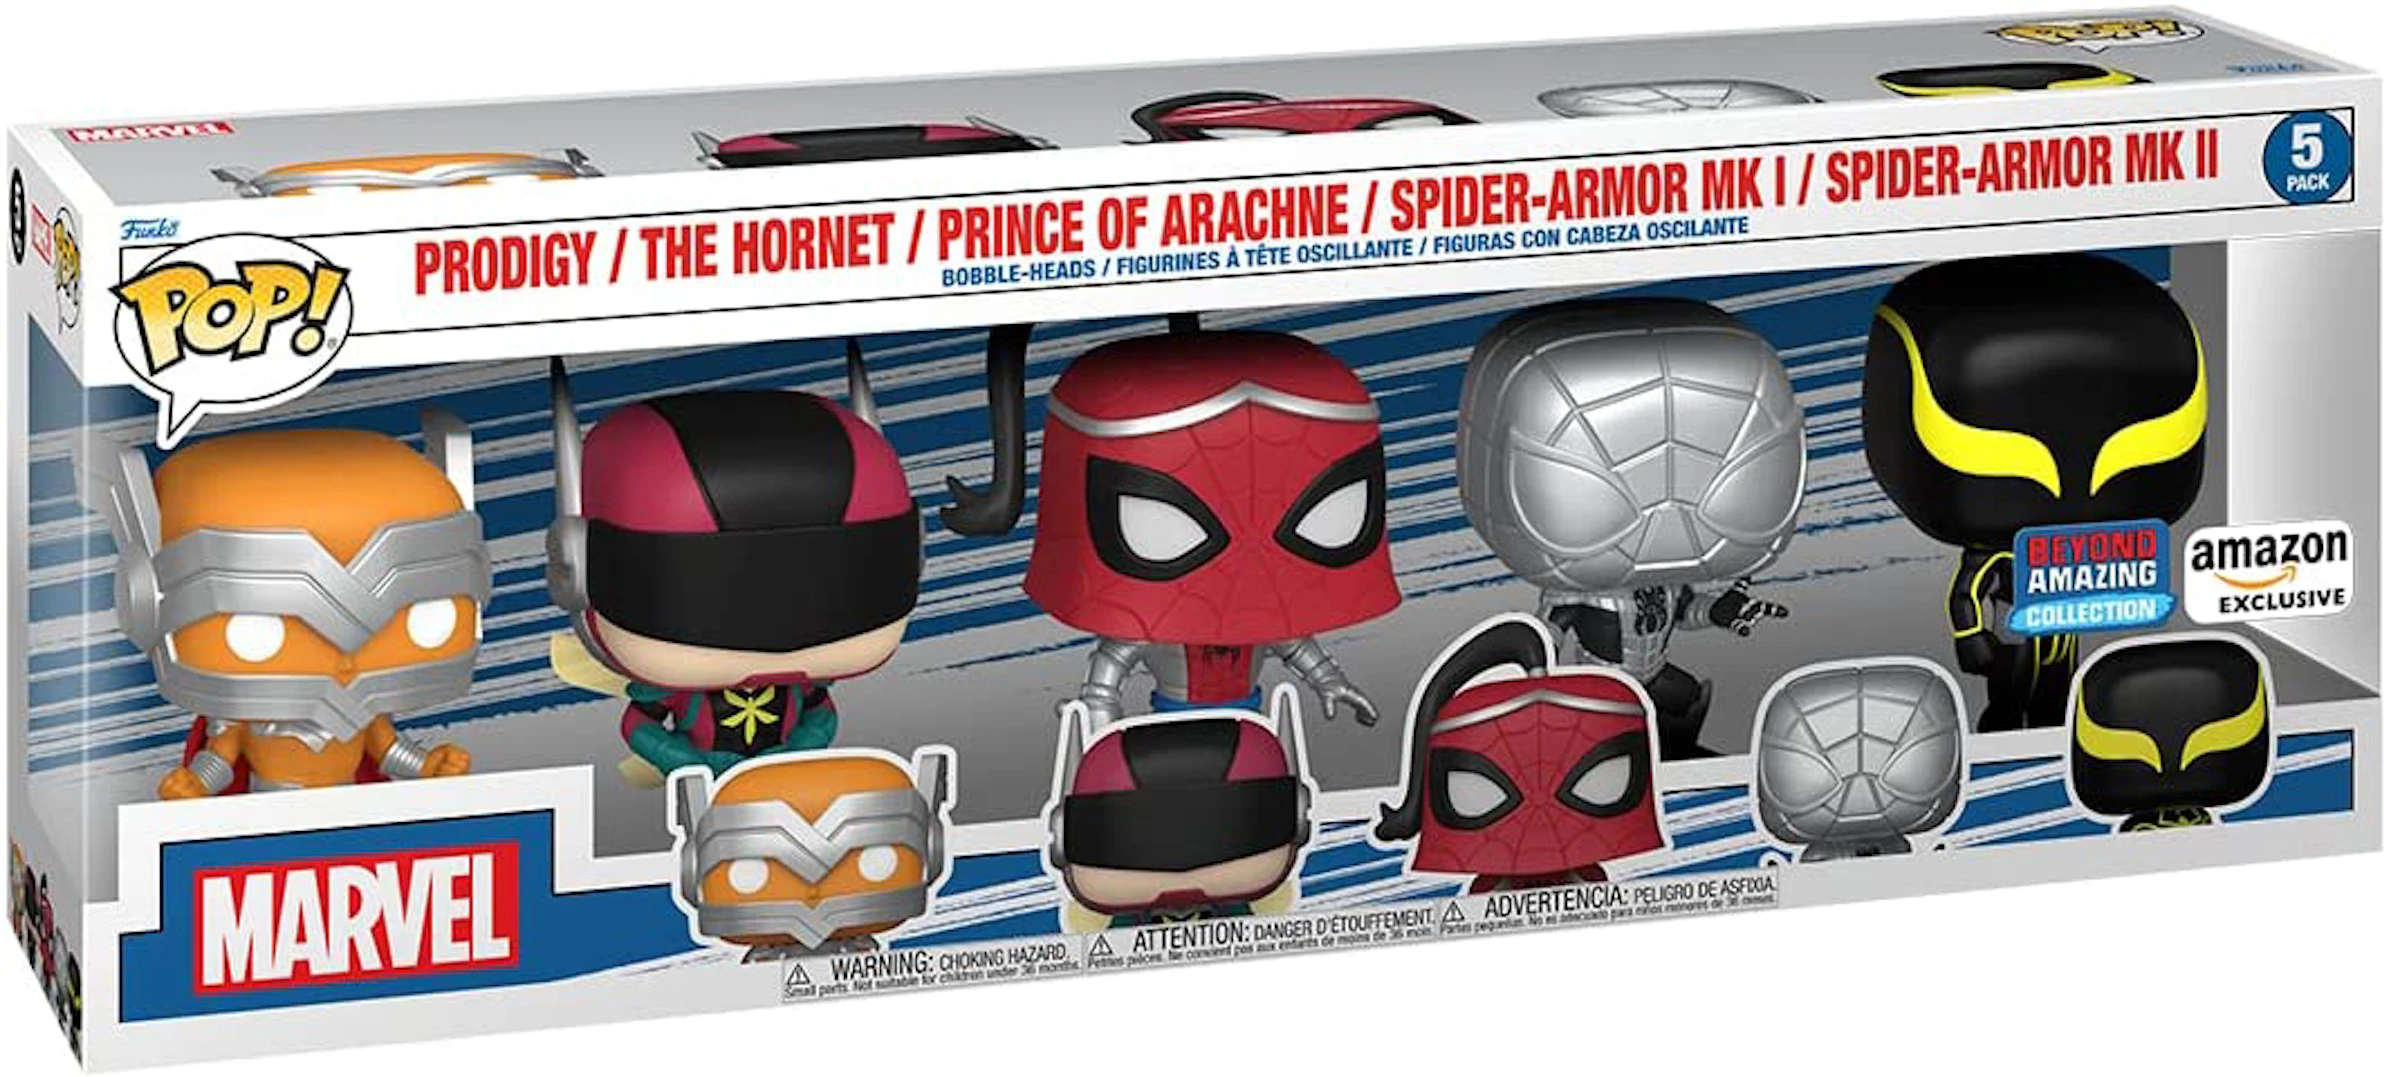 Funko Pop! Marvel Spider-Man Beyond Amazing Collection Amazon Exclusive  5-Pack - US